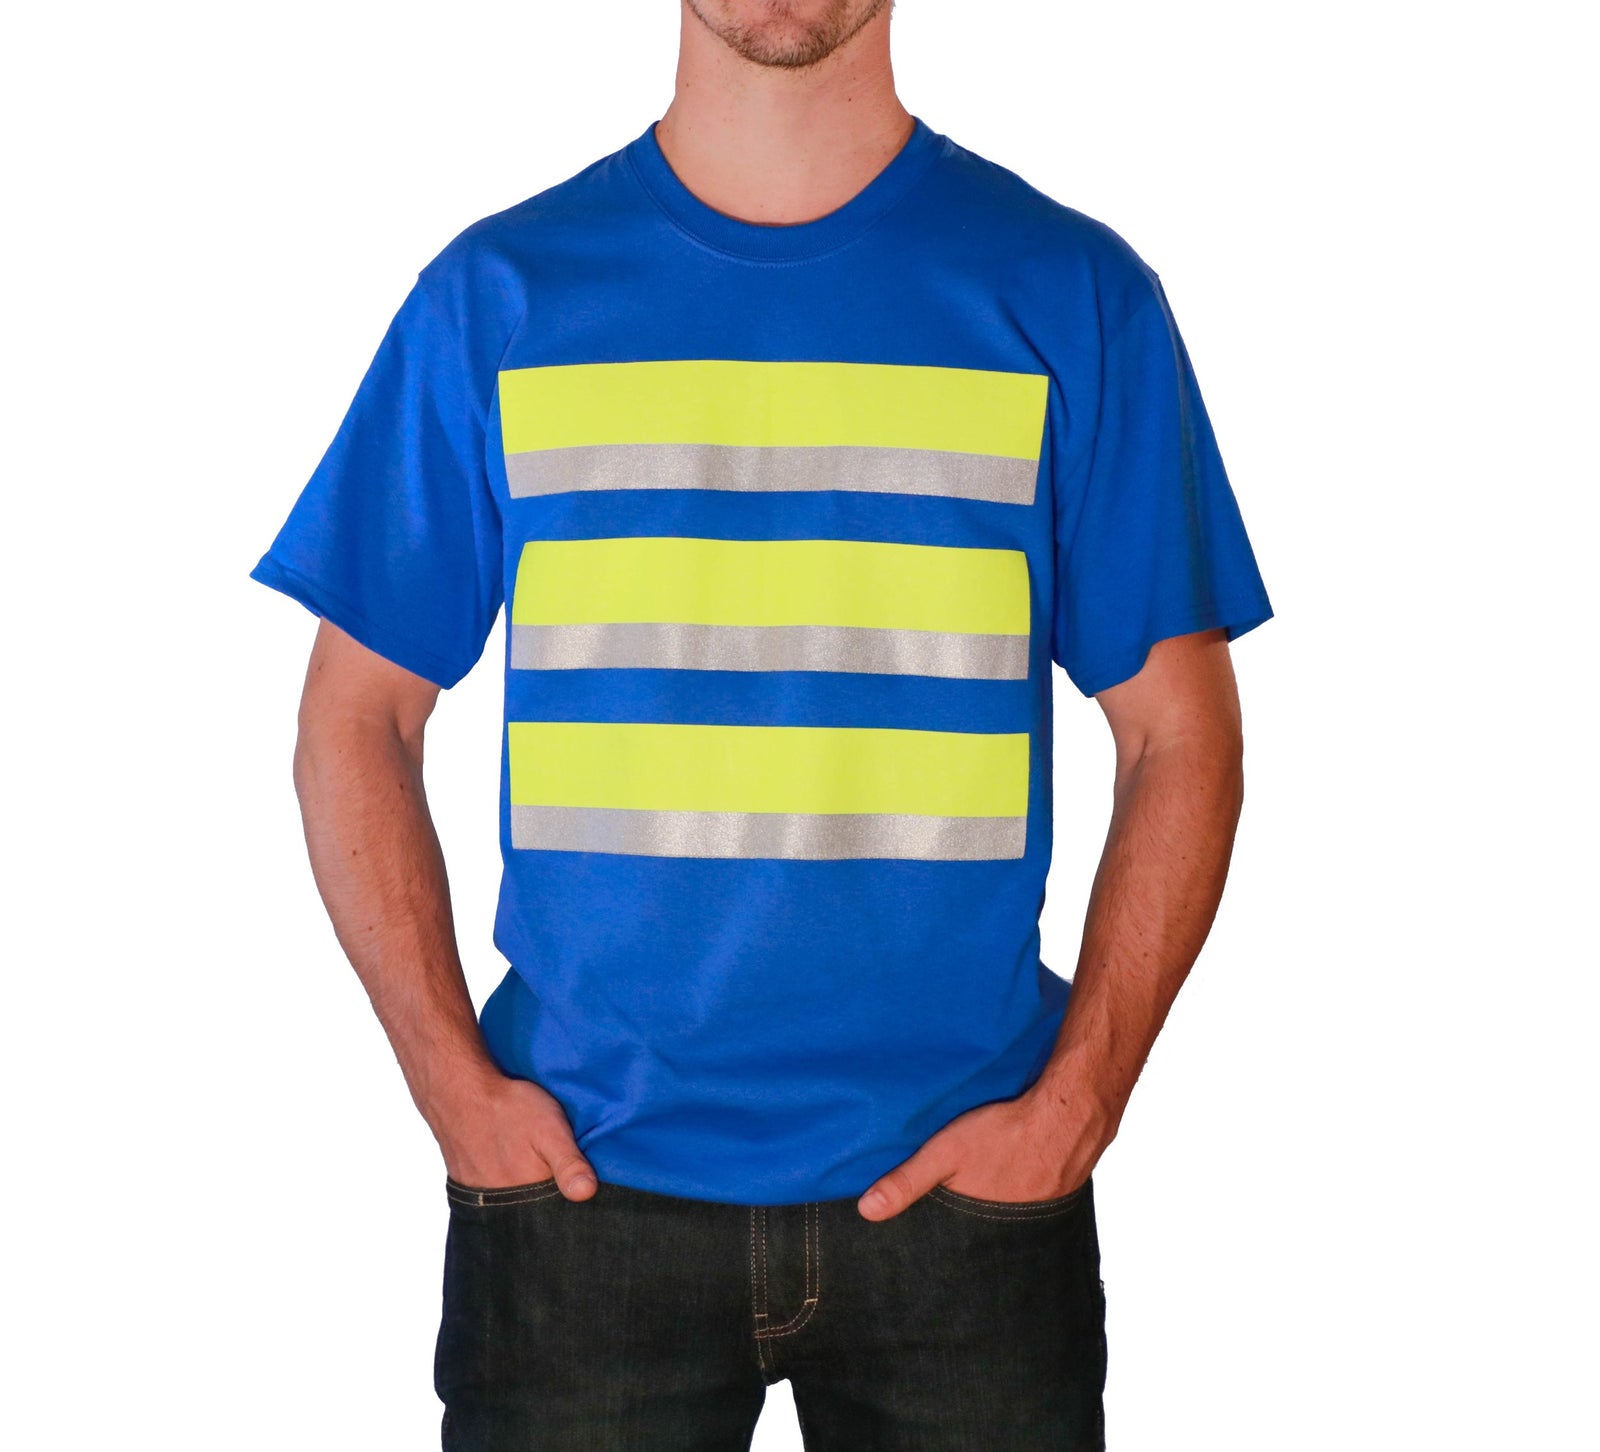 Tops, Crewneck, XS, High Visibility, Safety, L, Short Sleeves